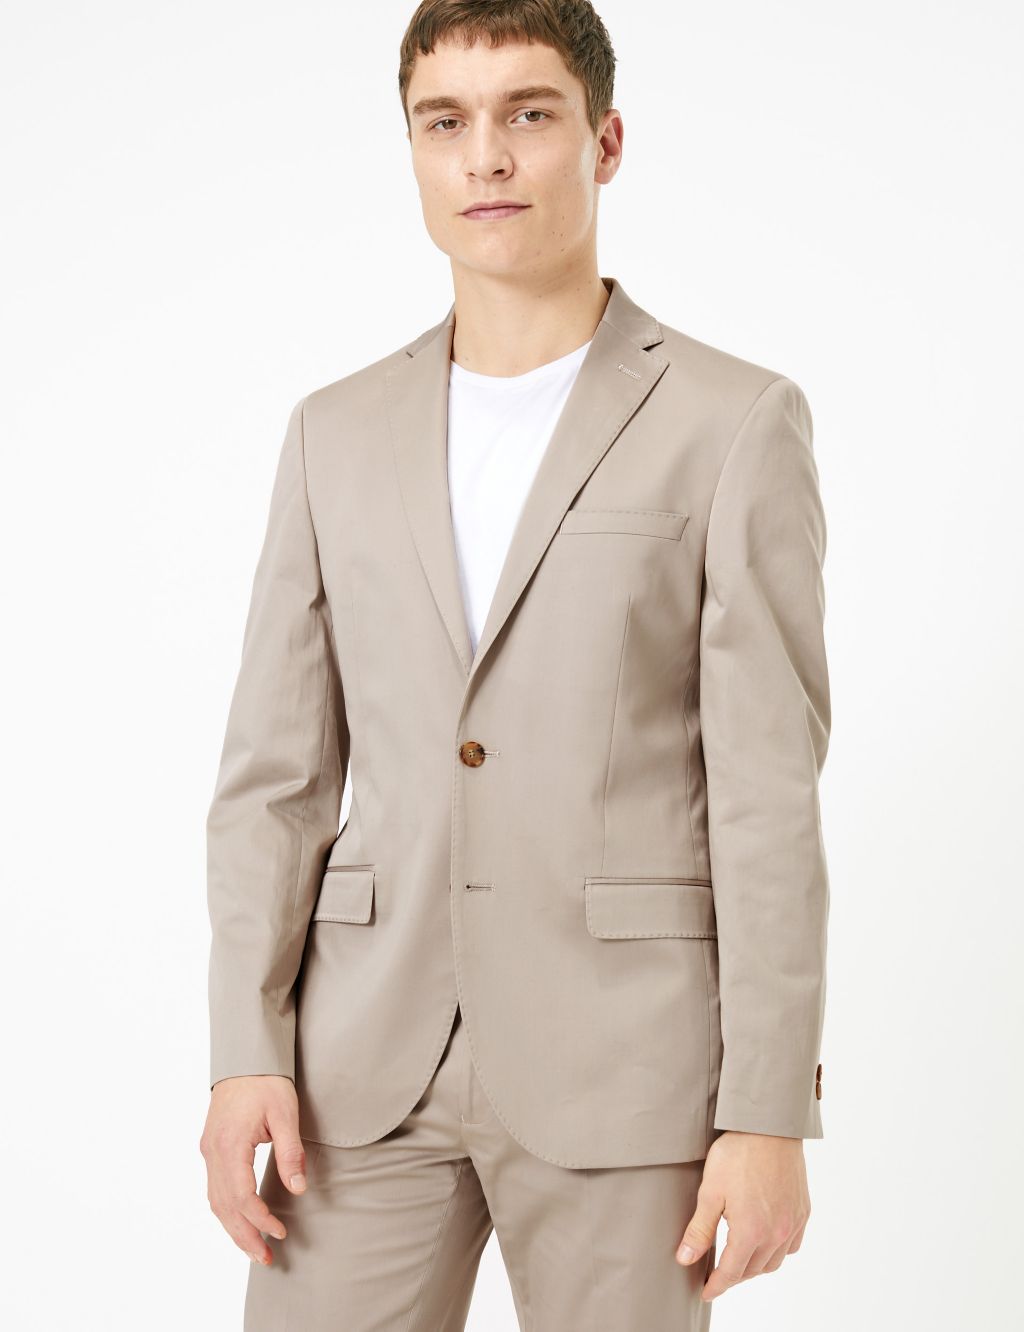 Slim Fit Jacket with Stretch | M&S Collection | M&S